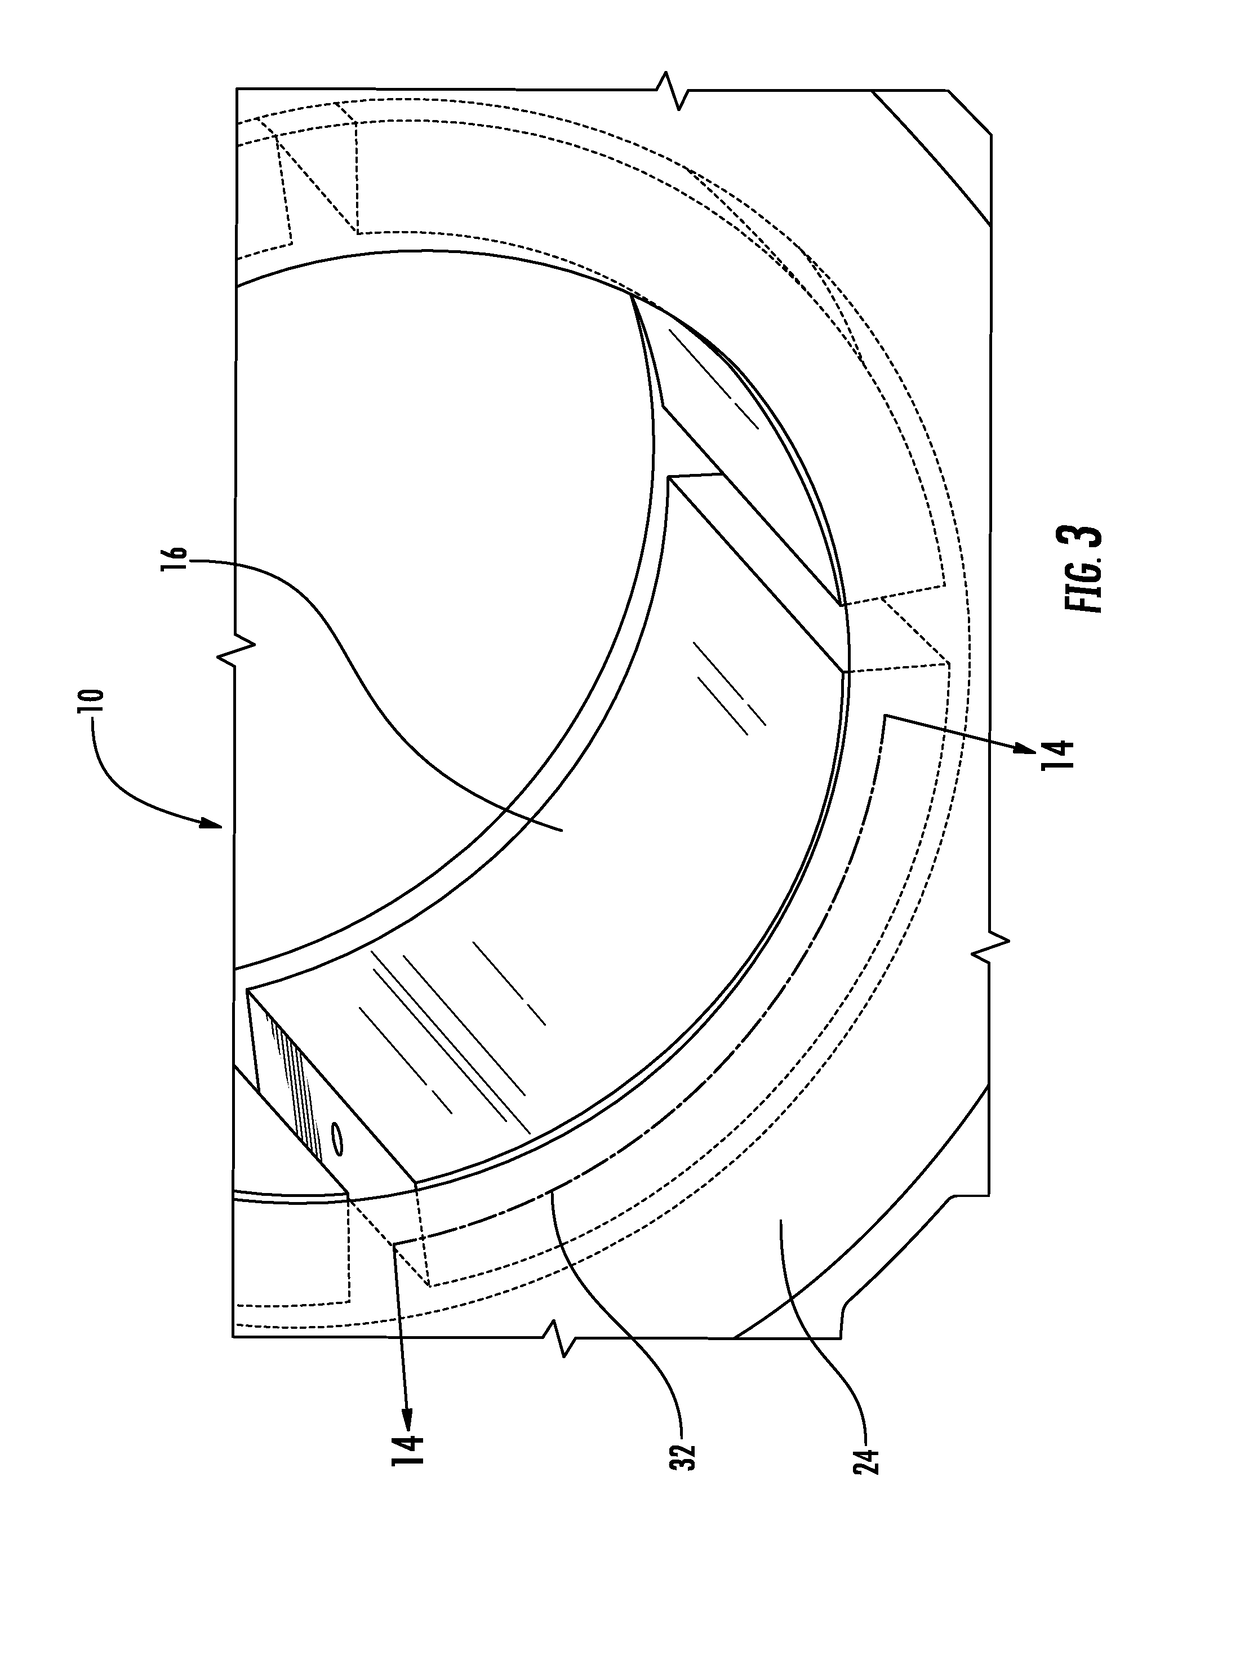 Bearing shoe for supporting a rotor journal in a turbine engine